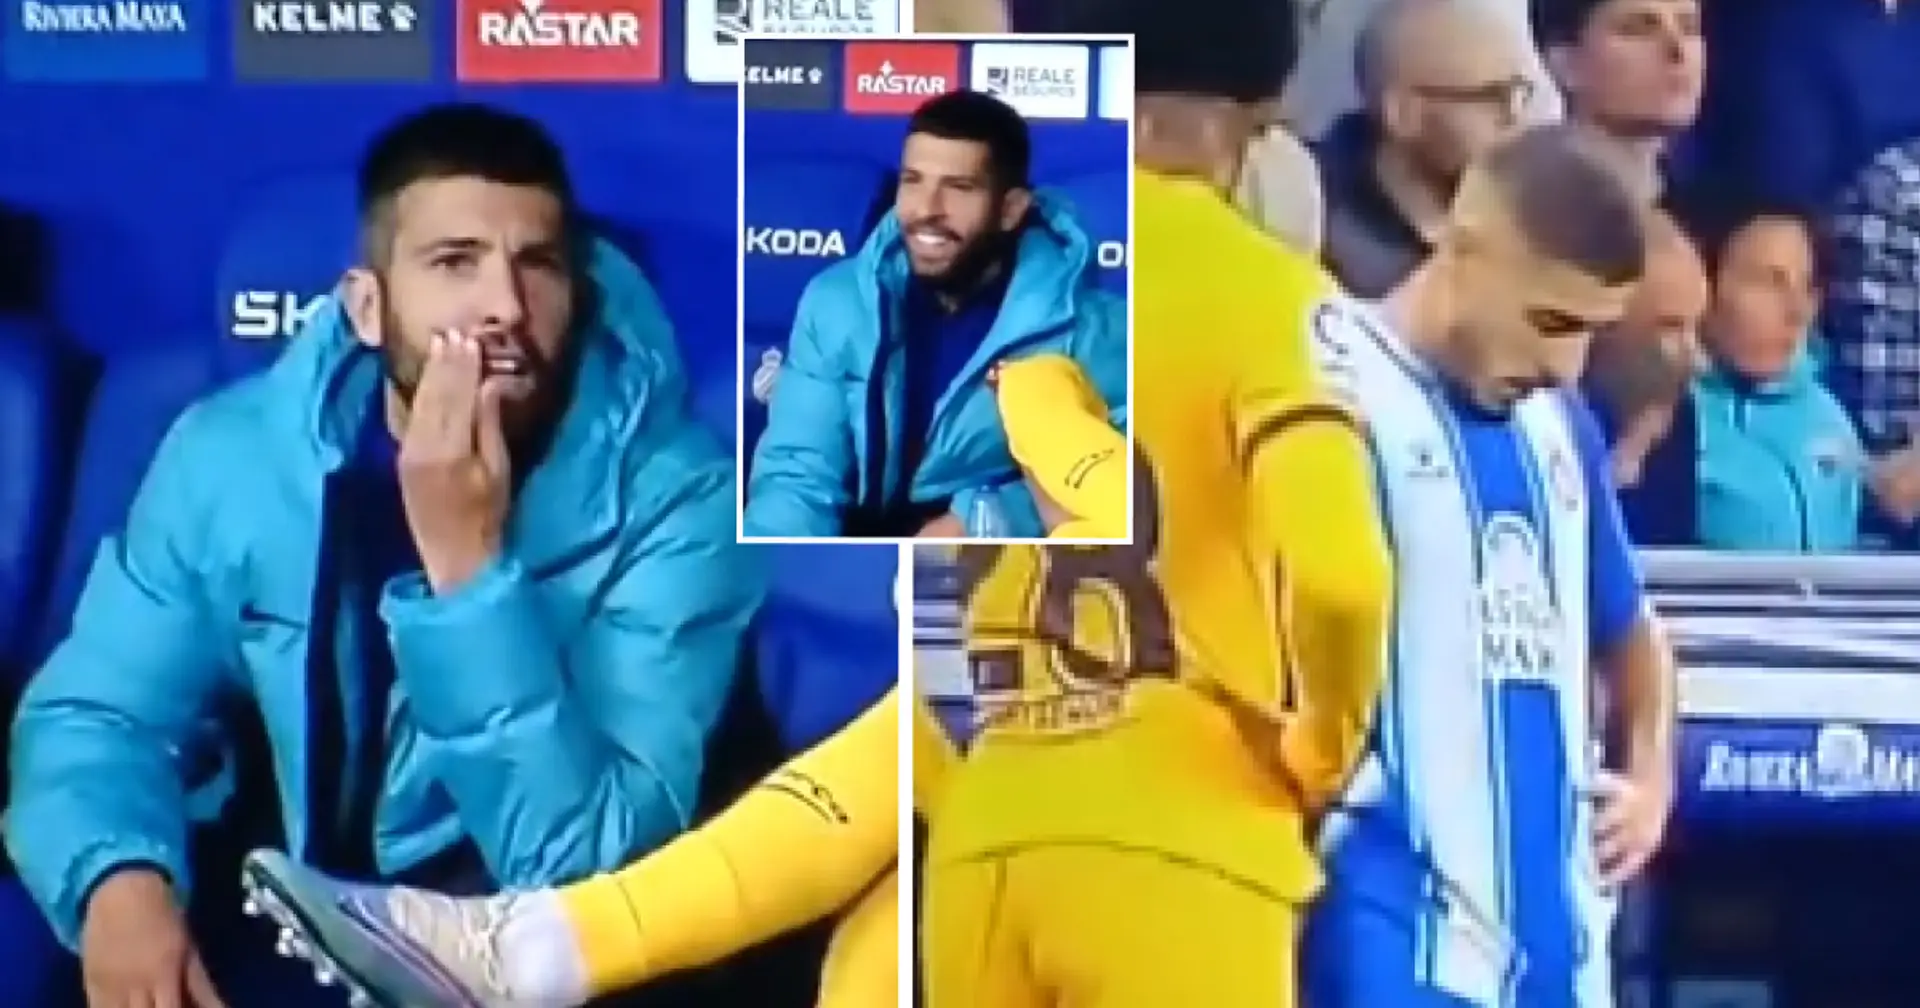 Caught on camera: 2 Barca players mock Espanyol defender from the bench 